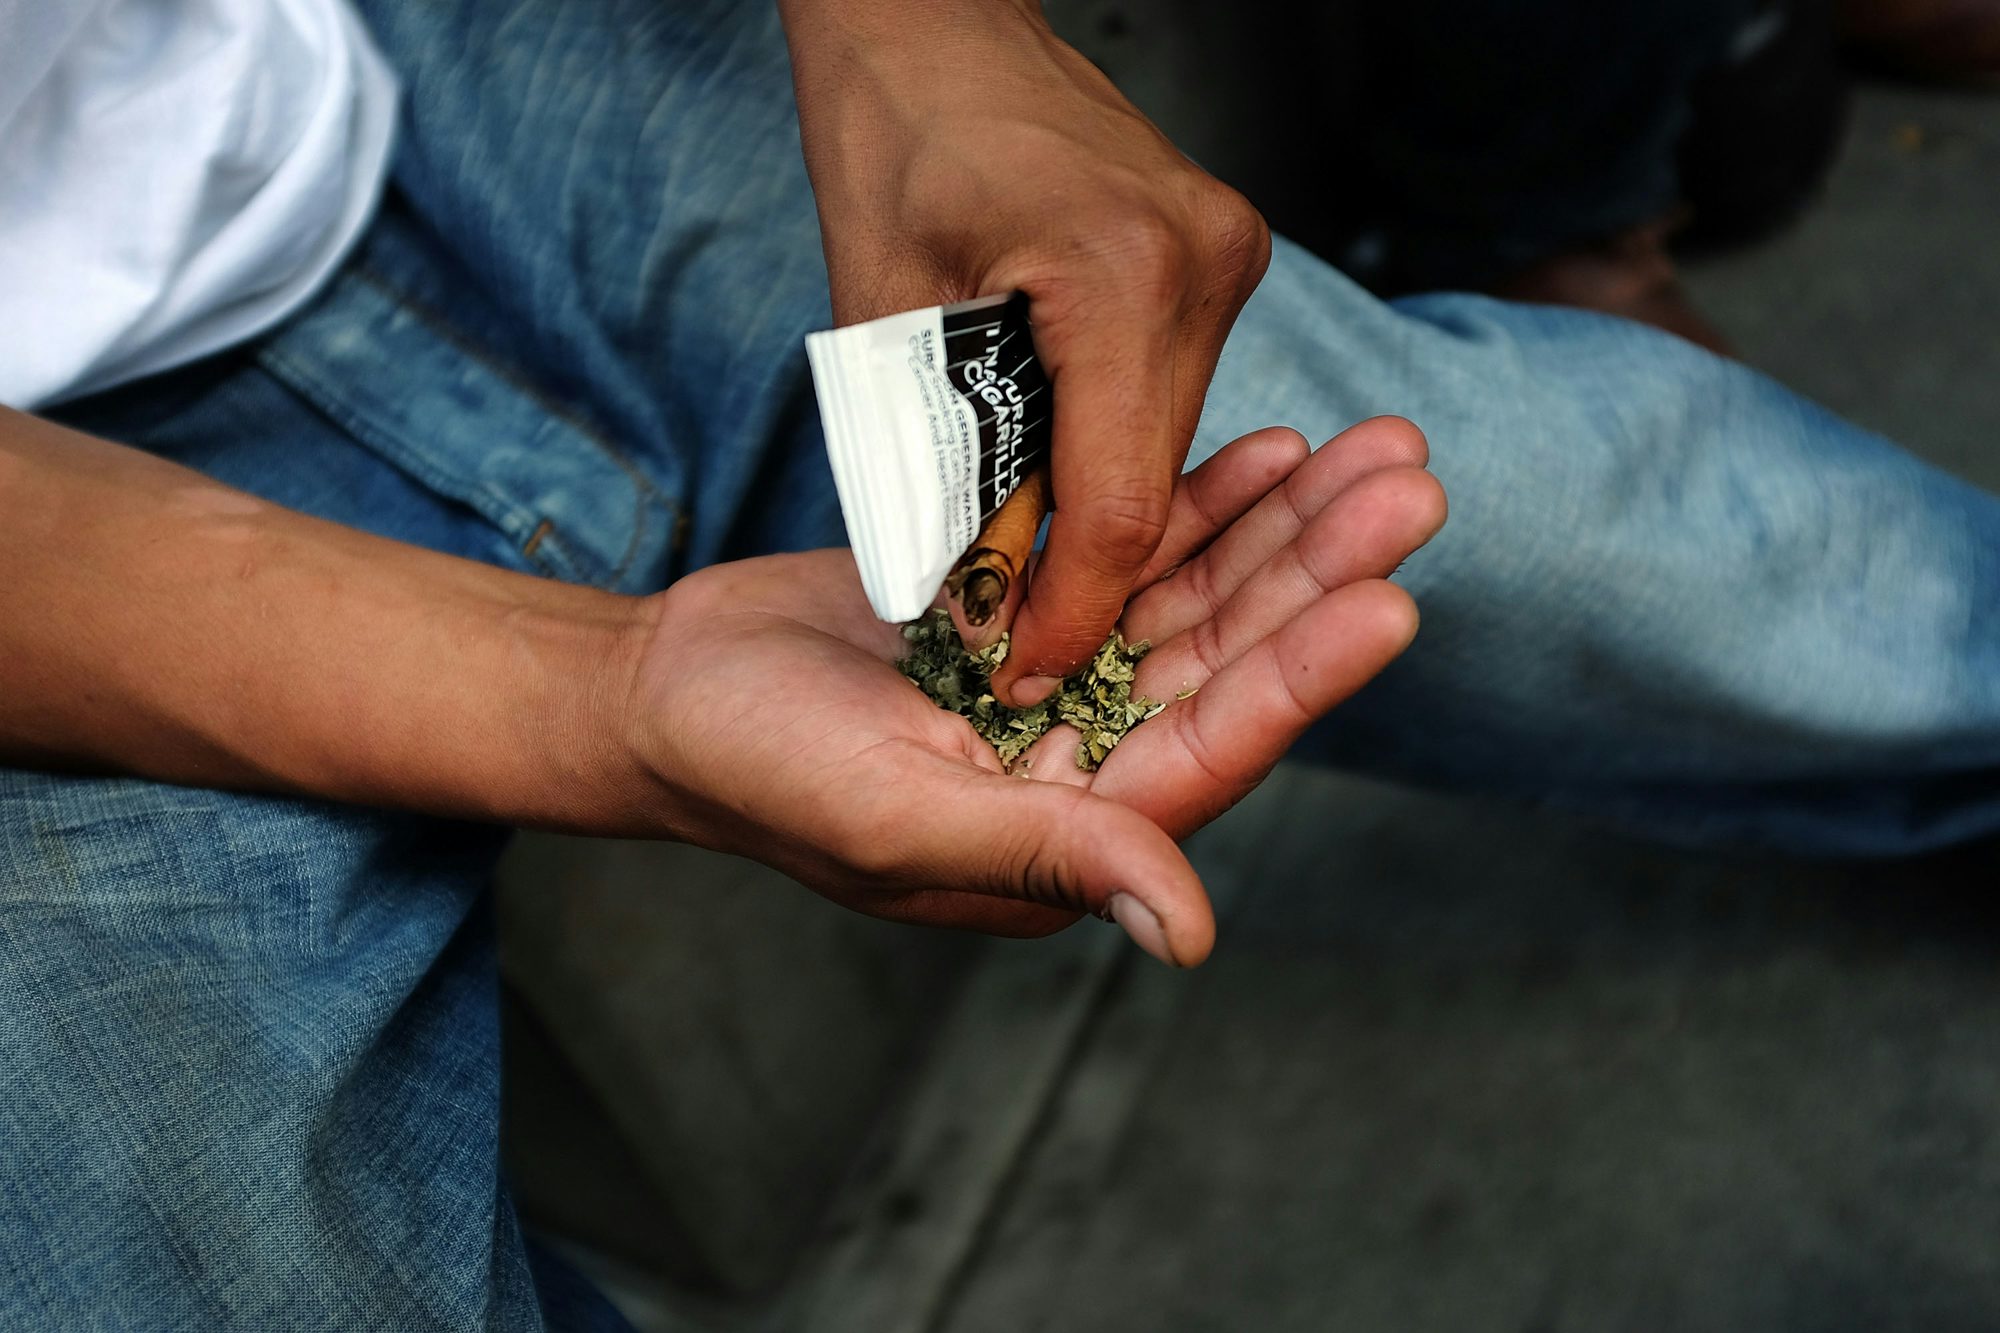 The DEA just approved synthetic cannabis as medicine while the real thing remains illegal 2 of 5 How a Sports Gambling Case Could Impact Legal Weed